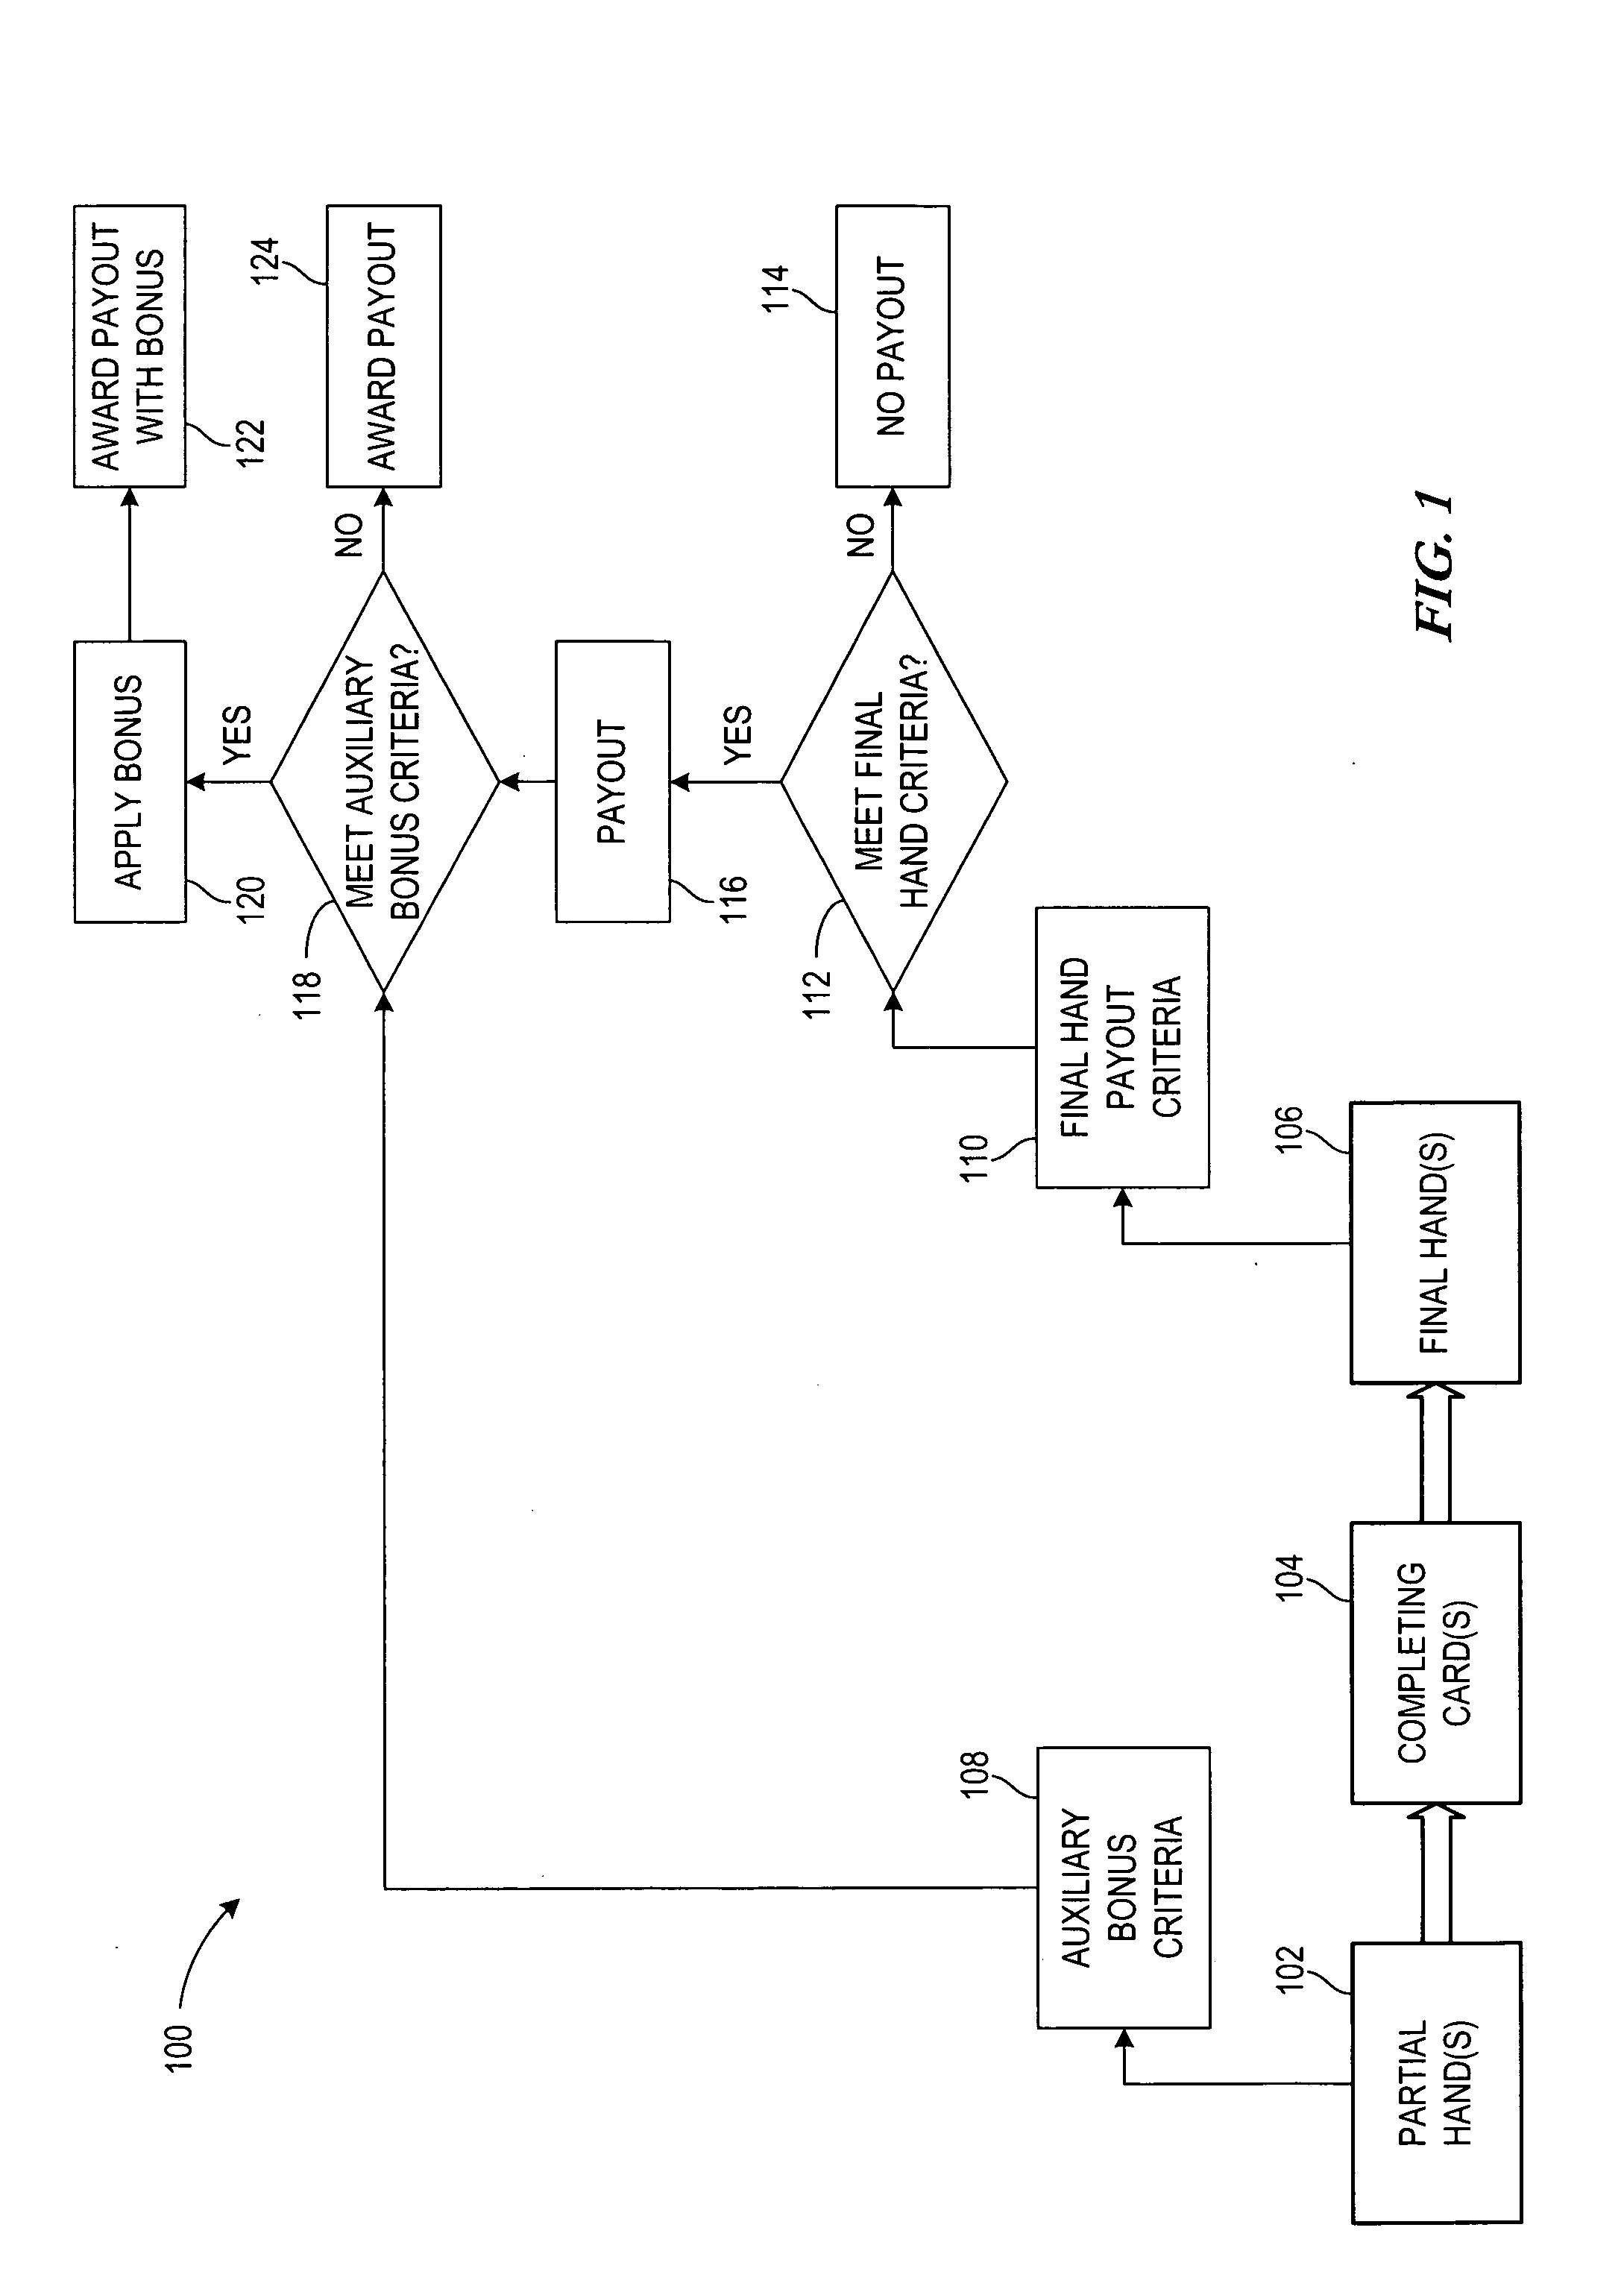 Apparatus and method for determining gaming payouts using partial game criteria